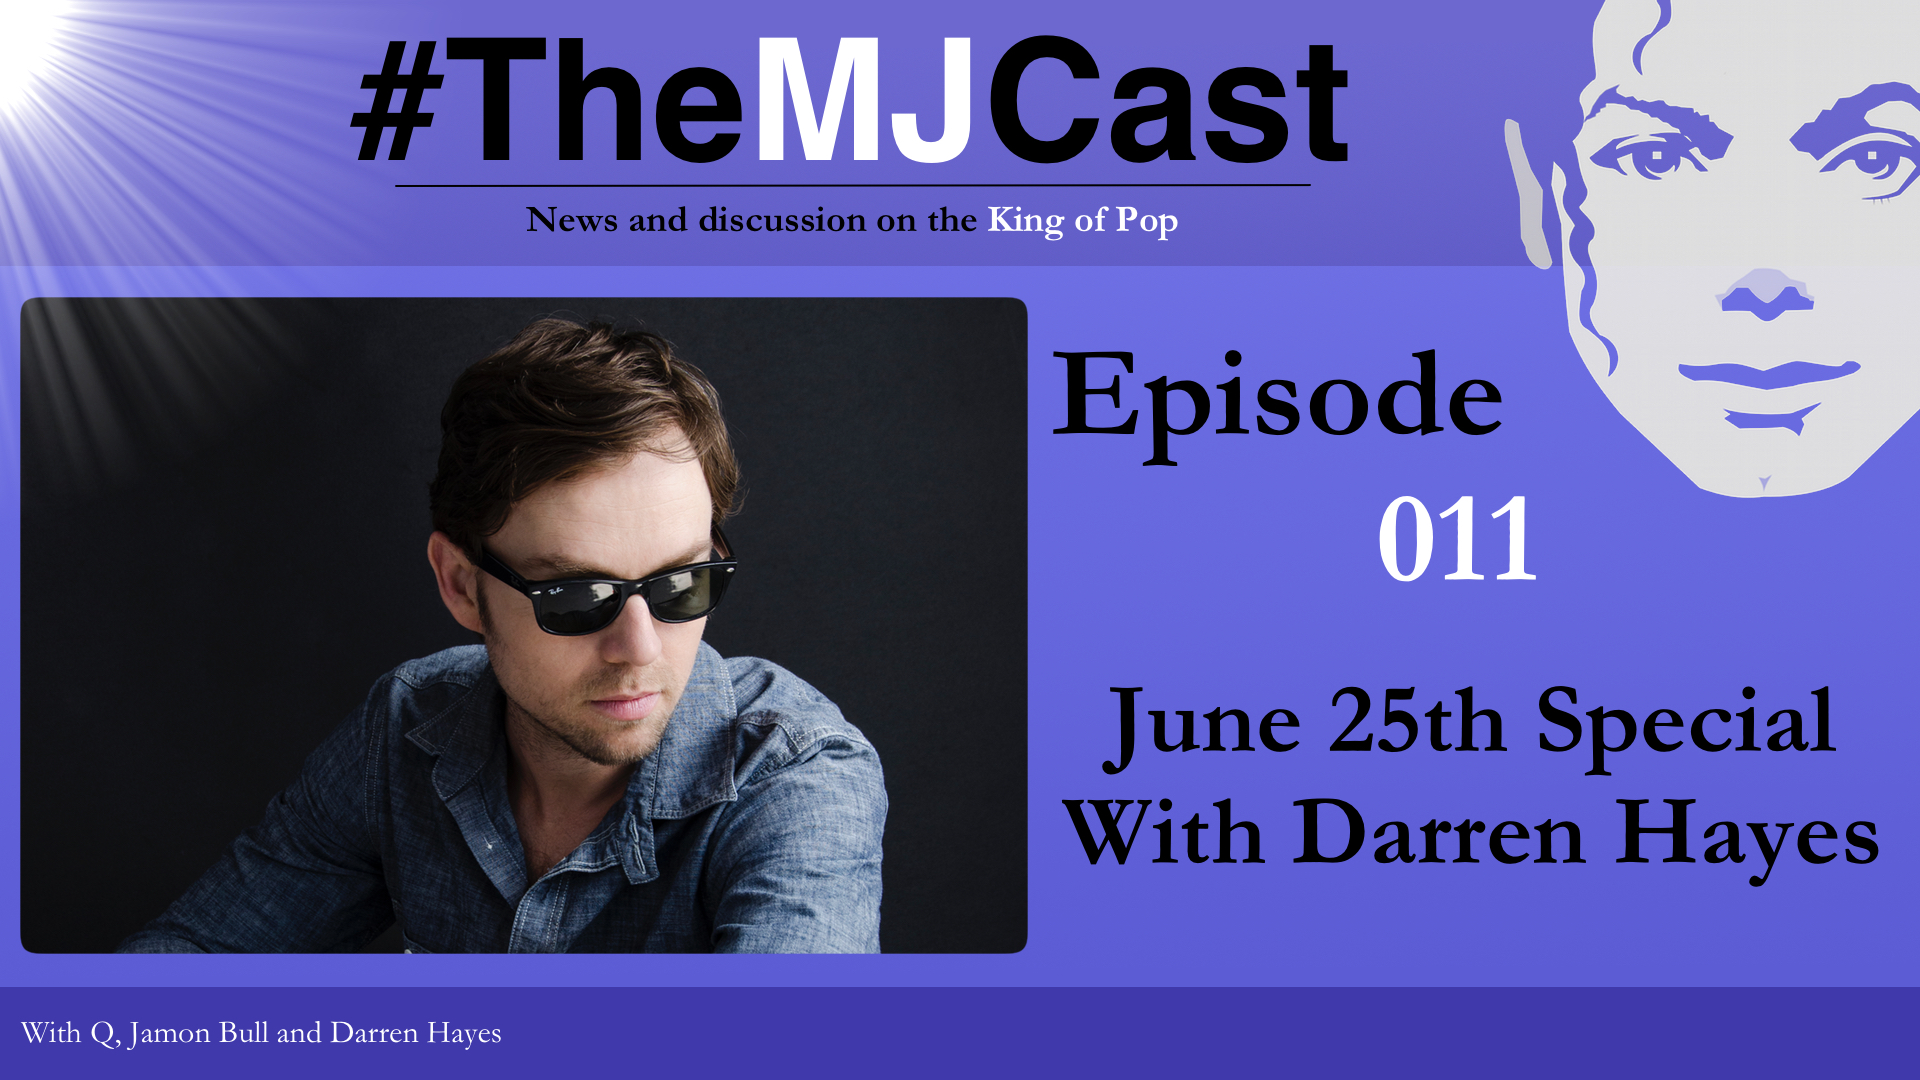 Episode 011 - June 25th Special With Darren Hayes YouTube Art